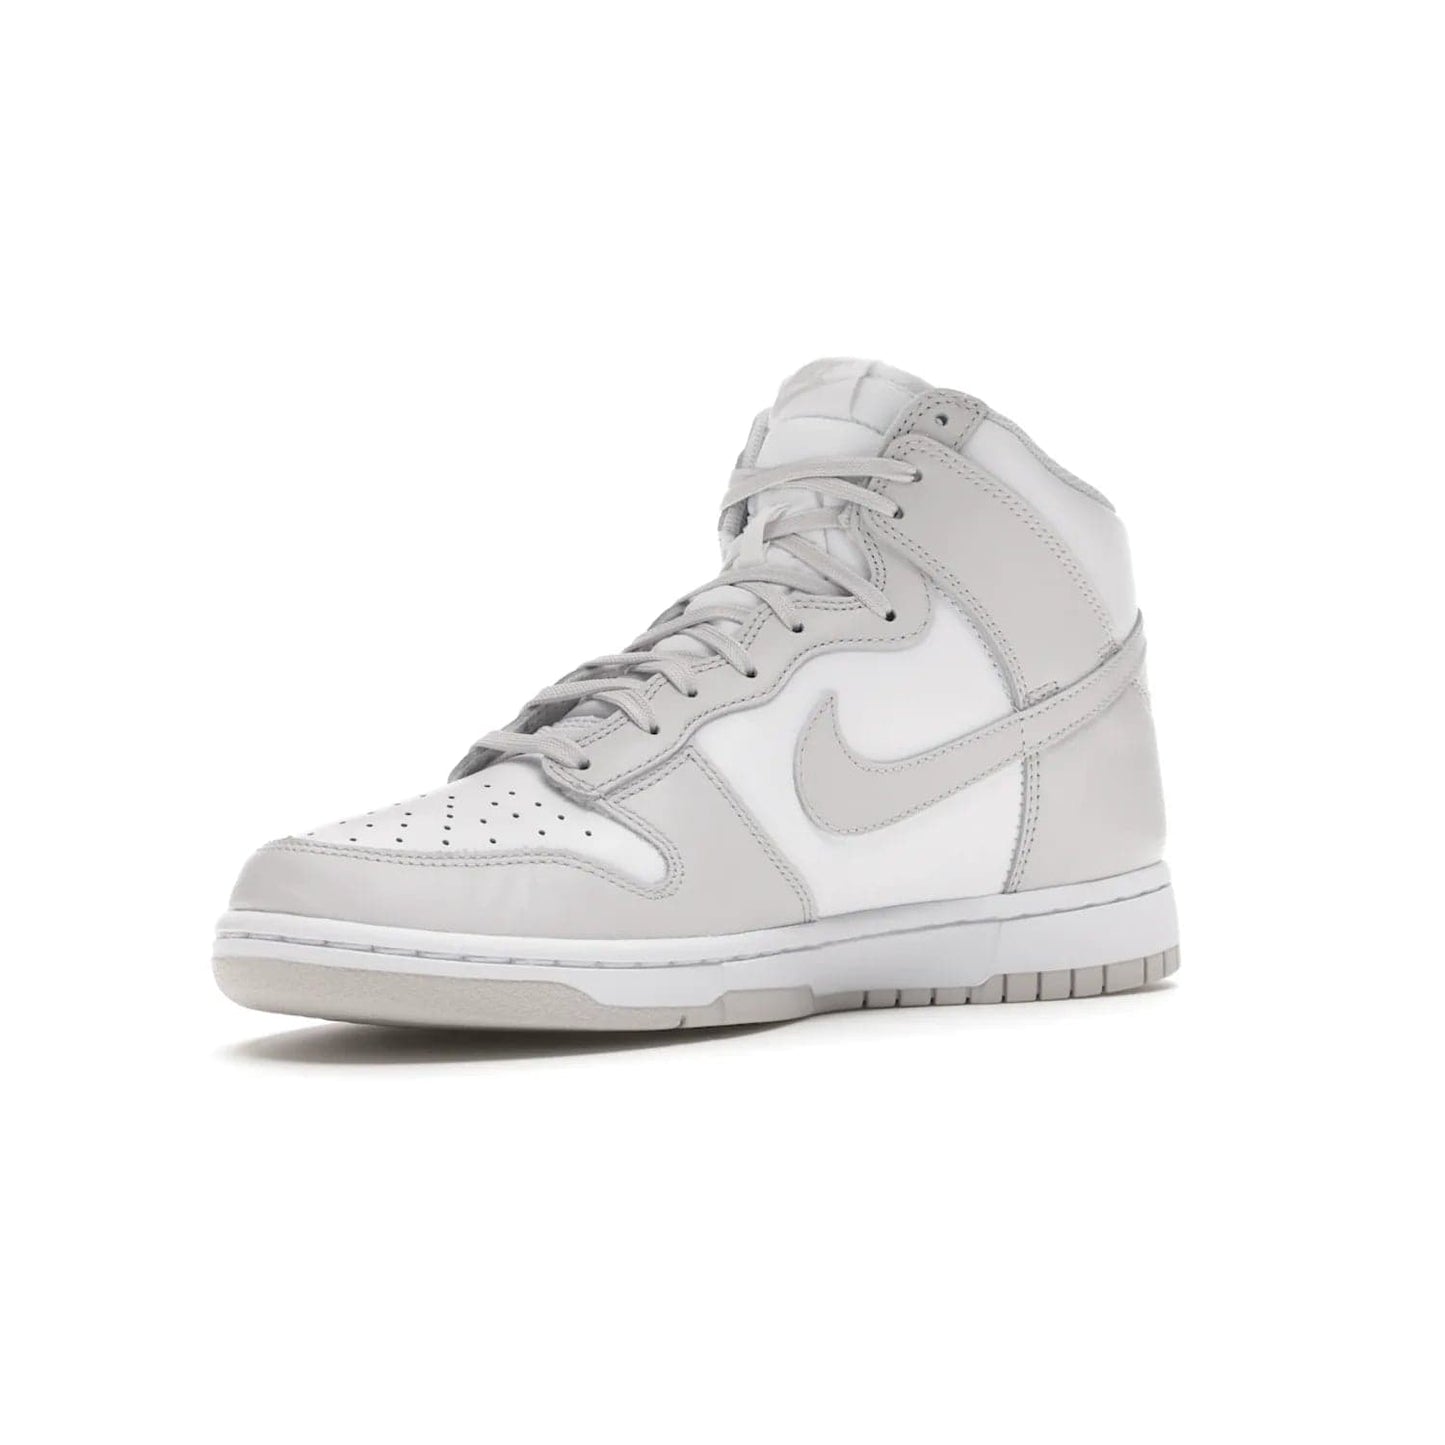 Nike Dunk High Retro White Vast Grey (2021) - Image 15 - Only at www.BallersClubKickz.com - Nike Dunk High Retro White Vast Grey 2021: classic '80s basketball sneaker with a crisp white base, grey overlays, midsole tooling and outsole. Dropped Feb. 2021.